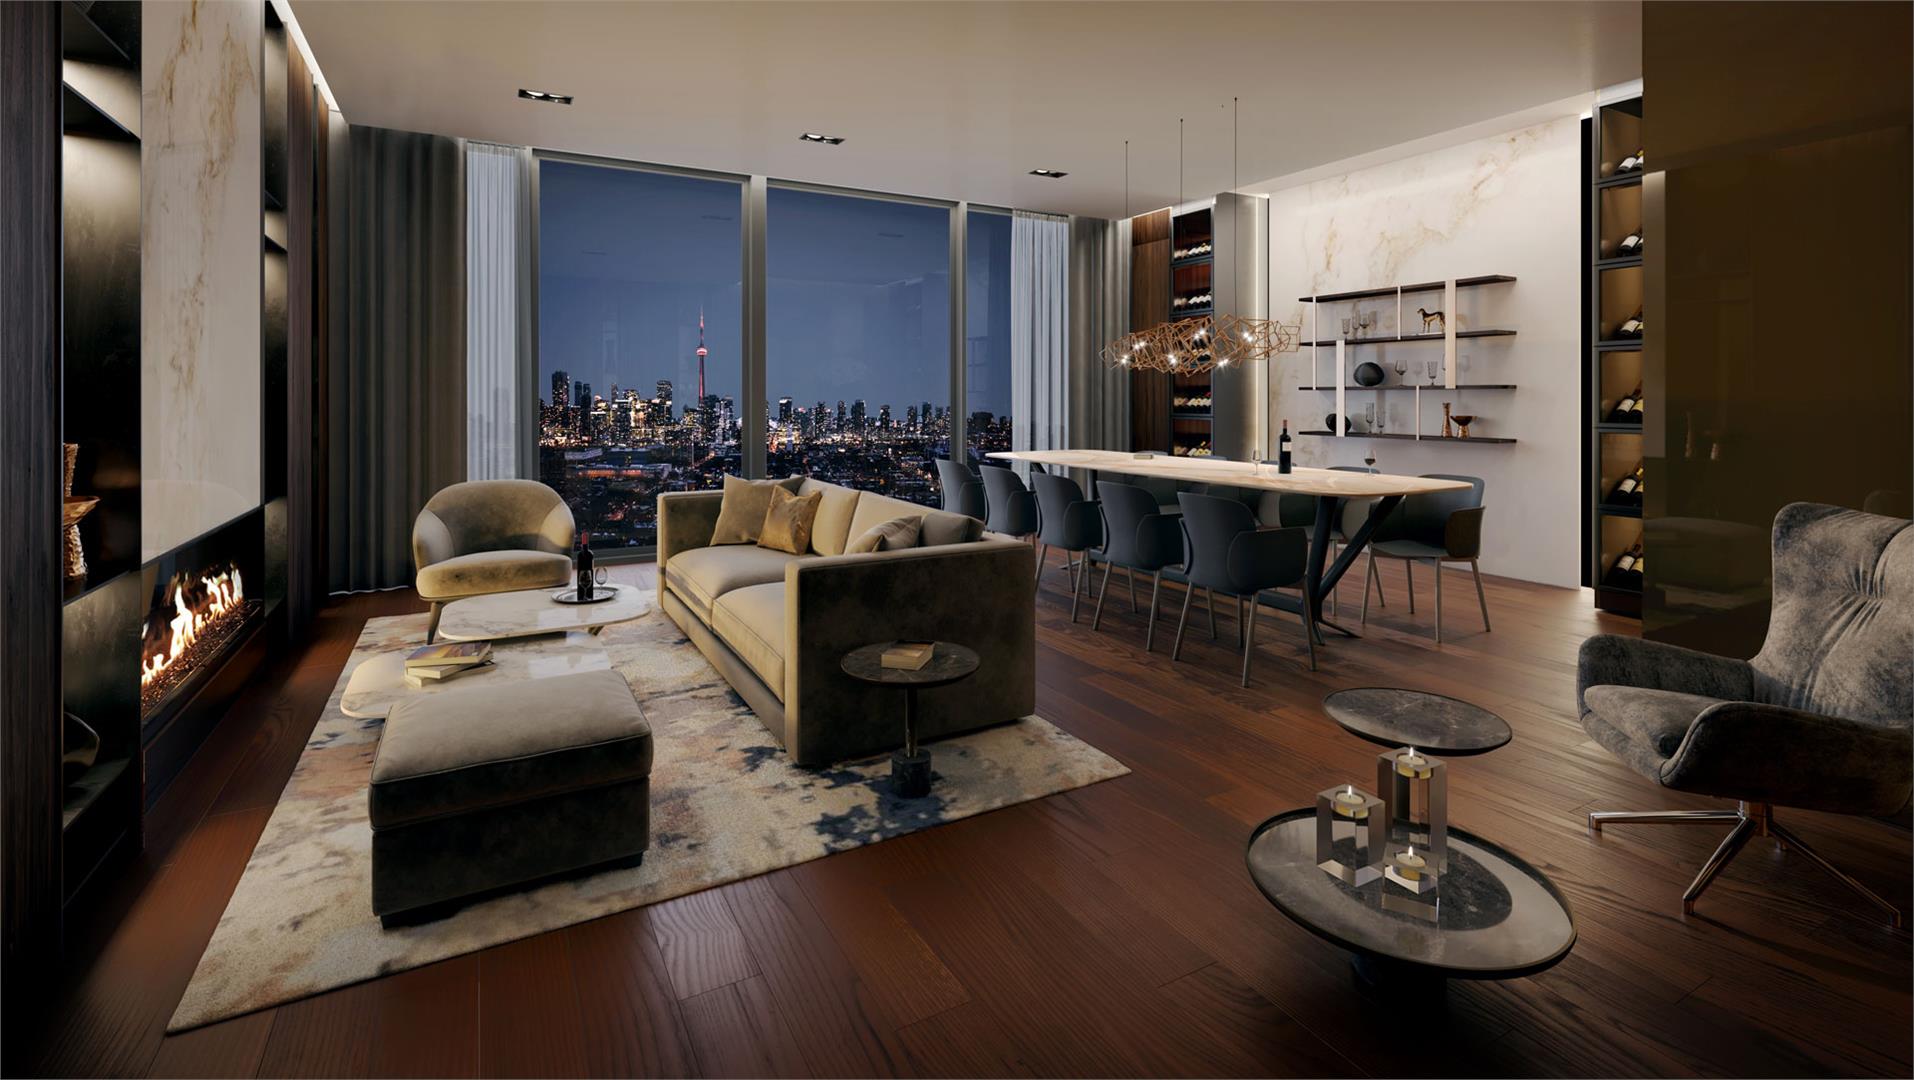 Rendering of St. Clair Village Condos party room and lounge.